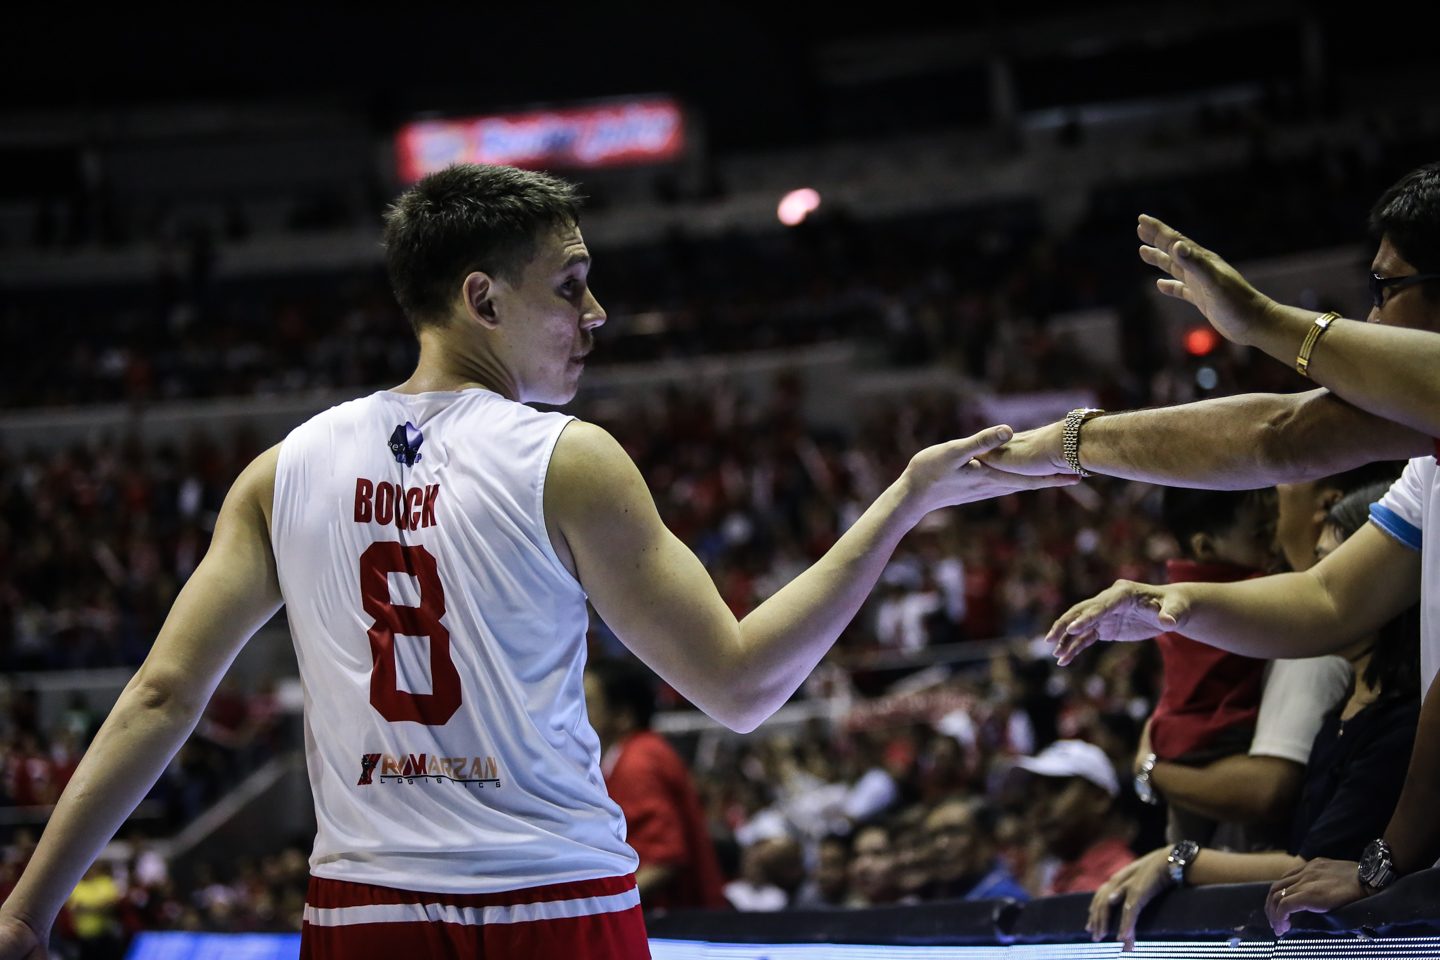 Back-to-back defeats from Lyceum Pirates prepared Bolick to play hero in NCAA finale